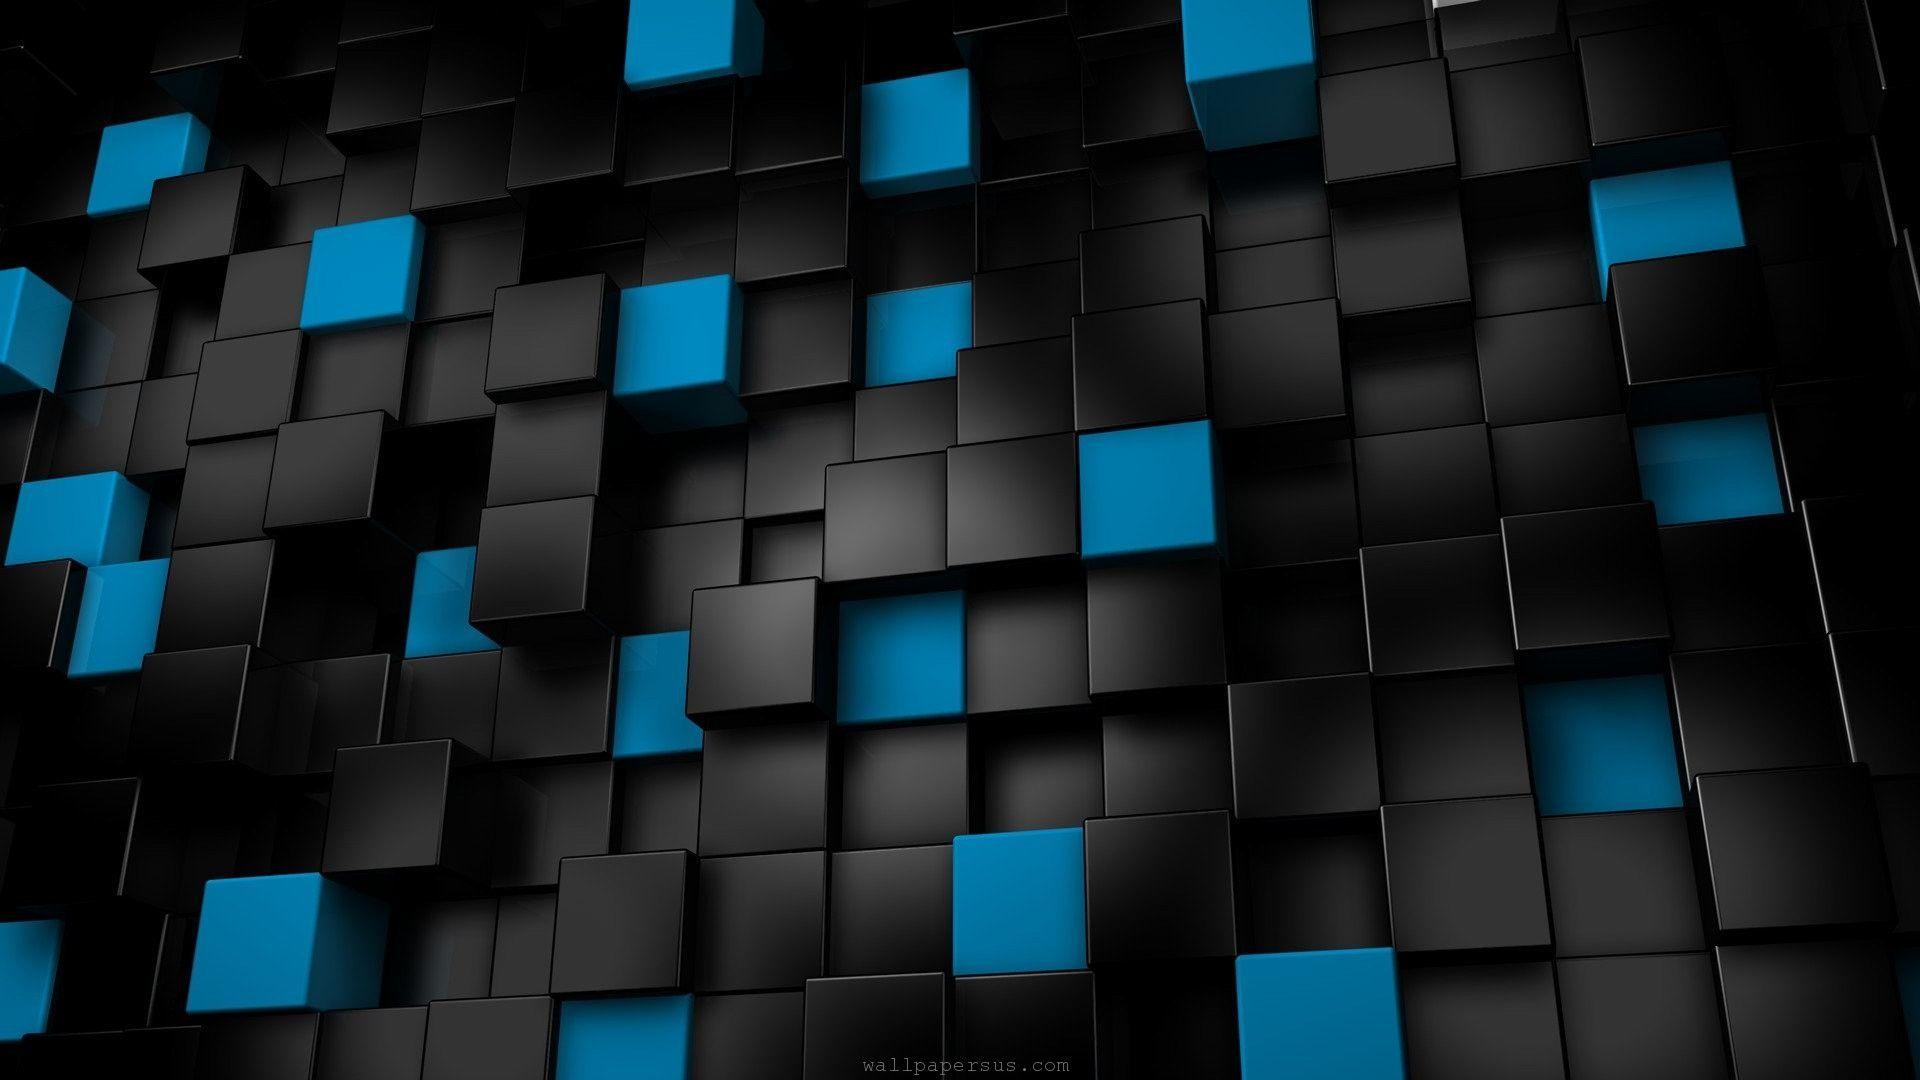 Download Free Abstract Black & Blue Boxes HD Wallpaper for Mobile